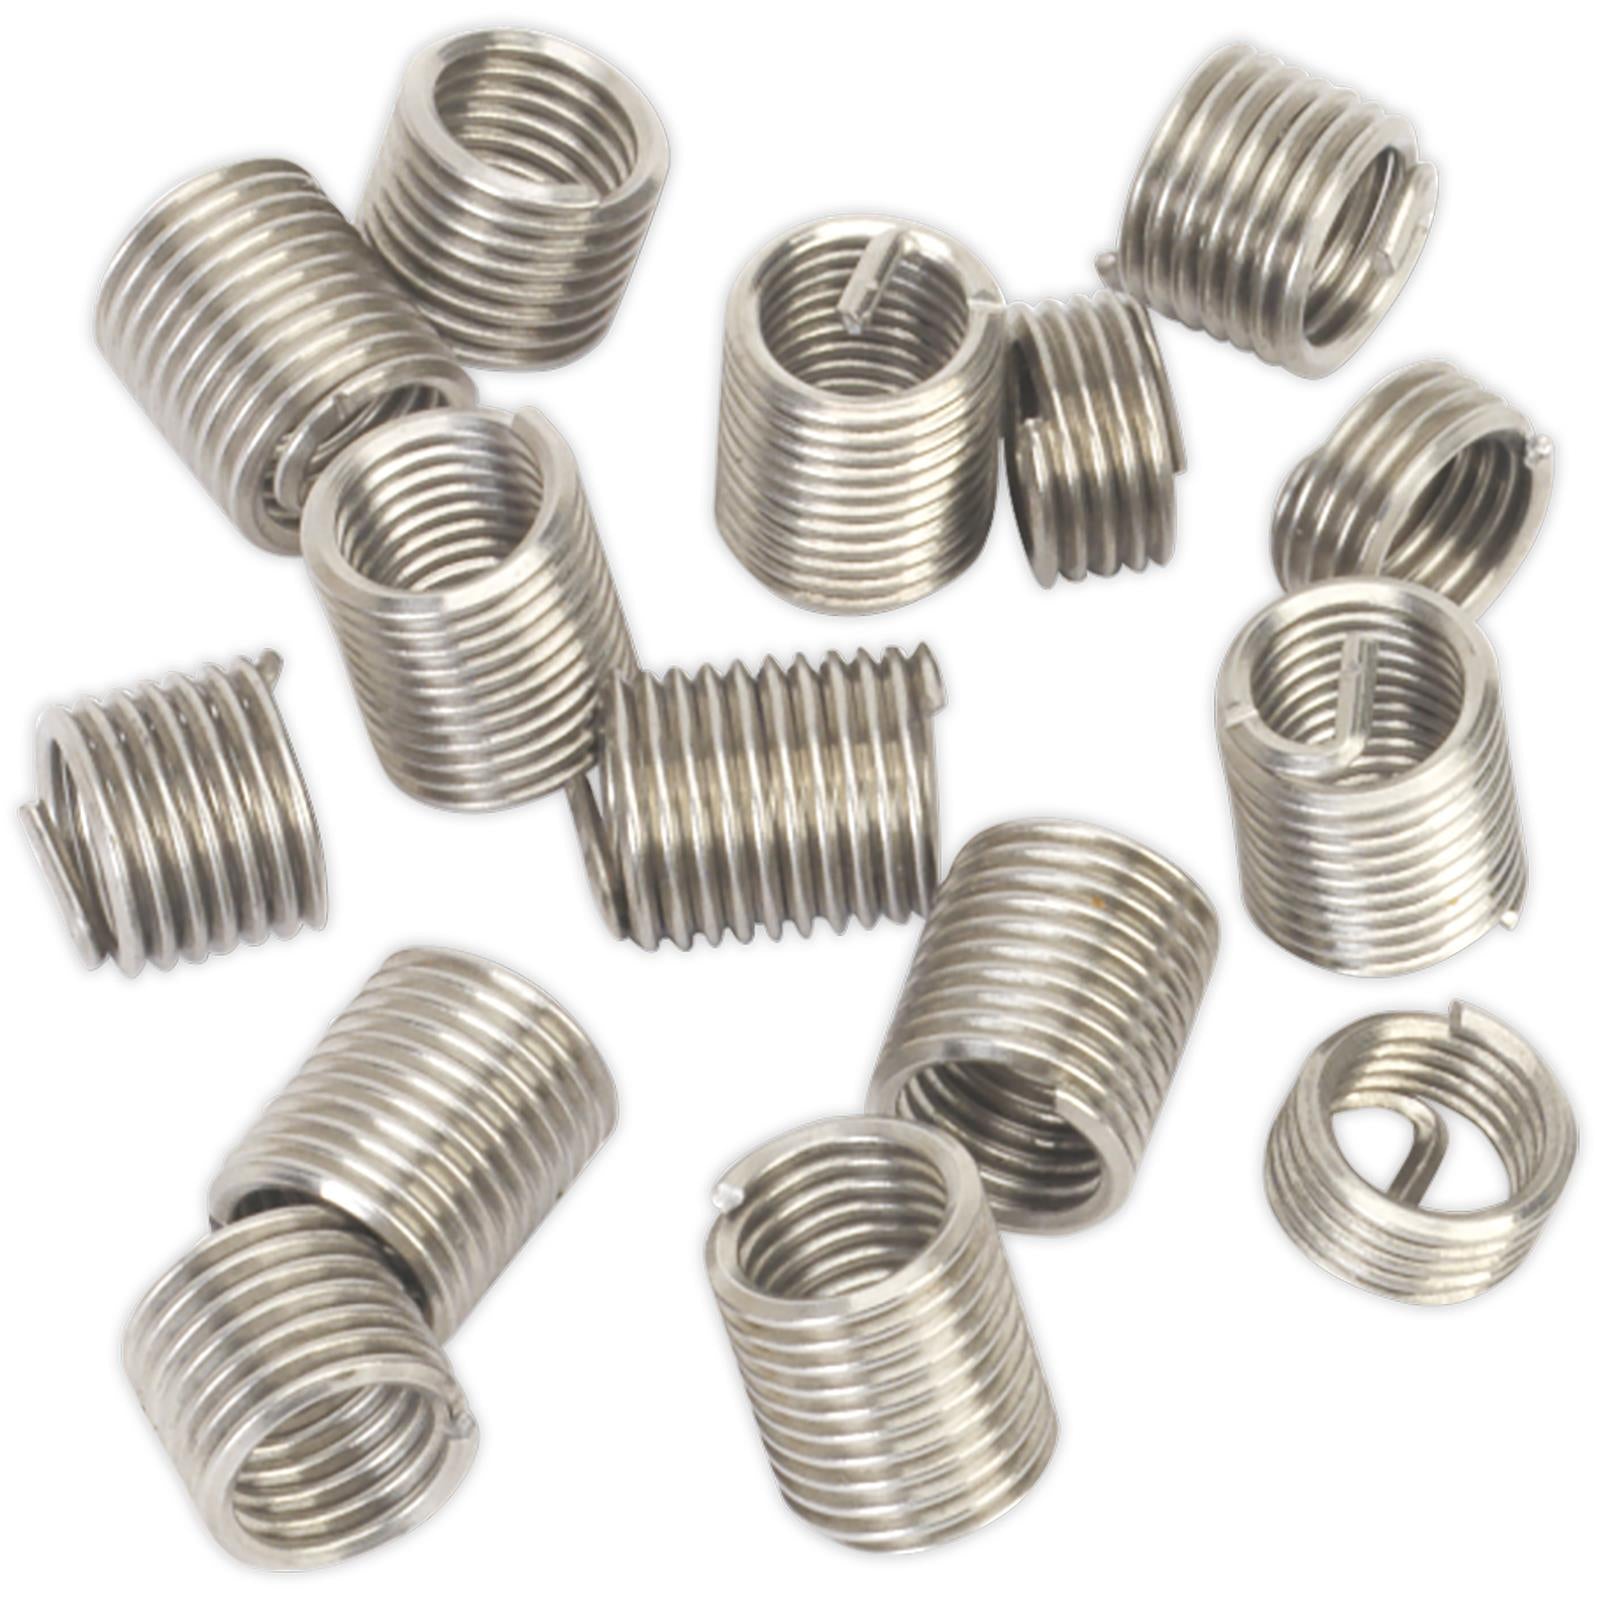 Sealey Thread Insert M8 x 1.25mm for TRM8 Threaded Inserts Helicoil 15 Pack